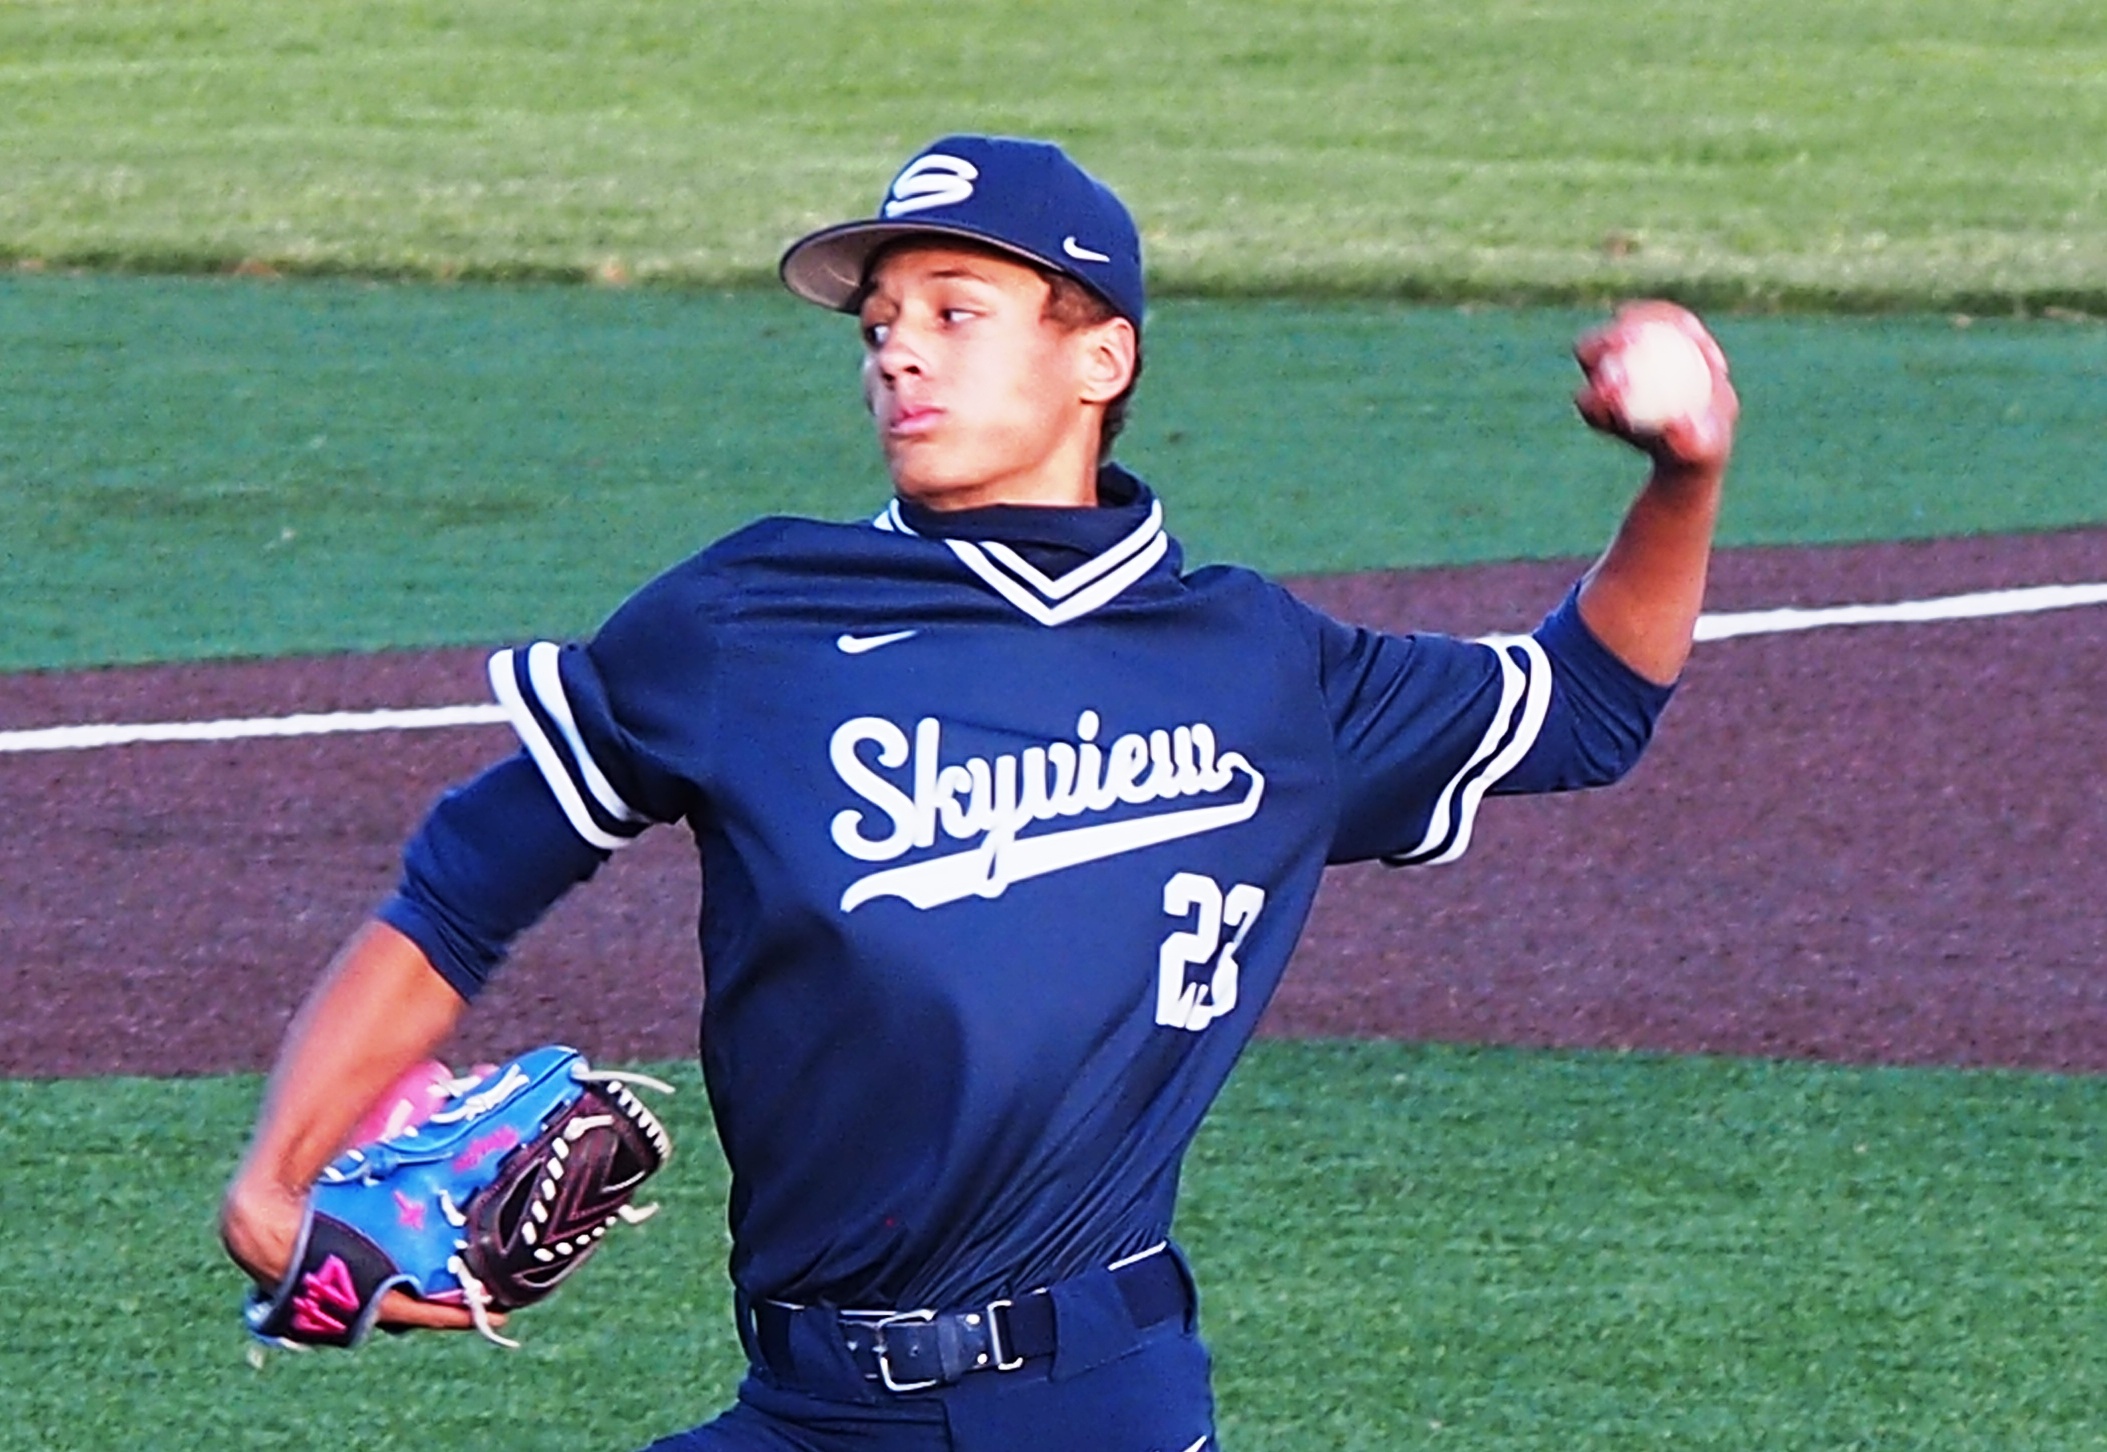 Skyview High School pitcher Caden Vire was picked by the Milwaukee Brewers in the 12th round of the Major League Baseball Draft on Tuesday, July 13, 2021.